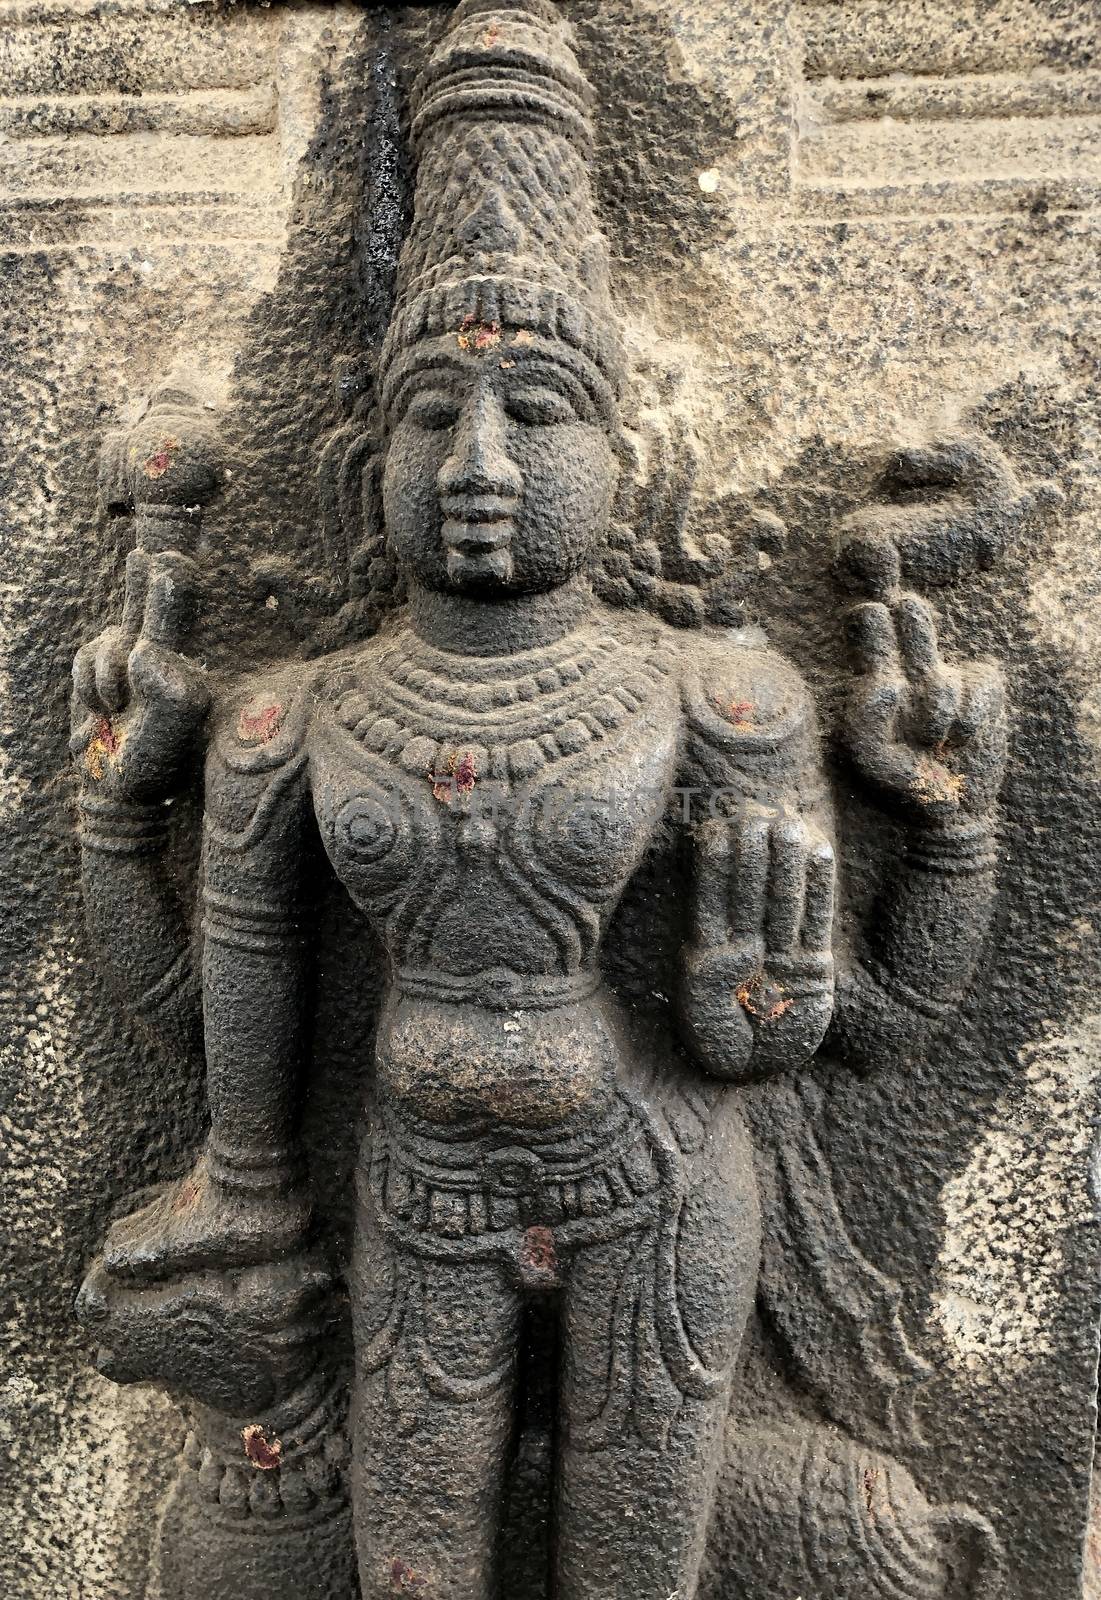 God holding the Bull deity sculpture. Bas relief sculpture carved in the stone walls of Shiva temple, Tamil nadu by prabhakaran851